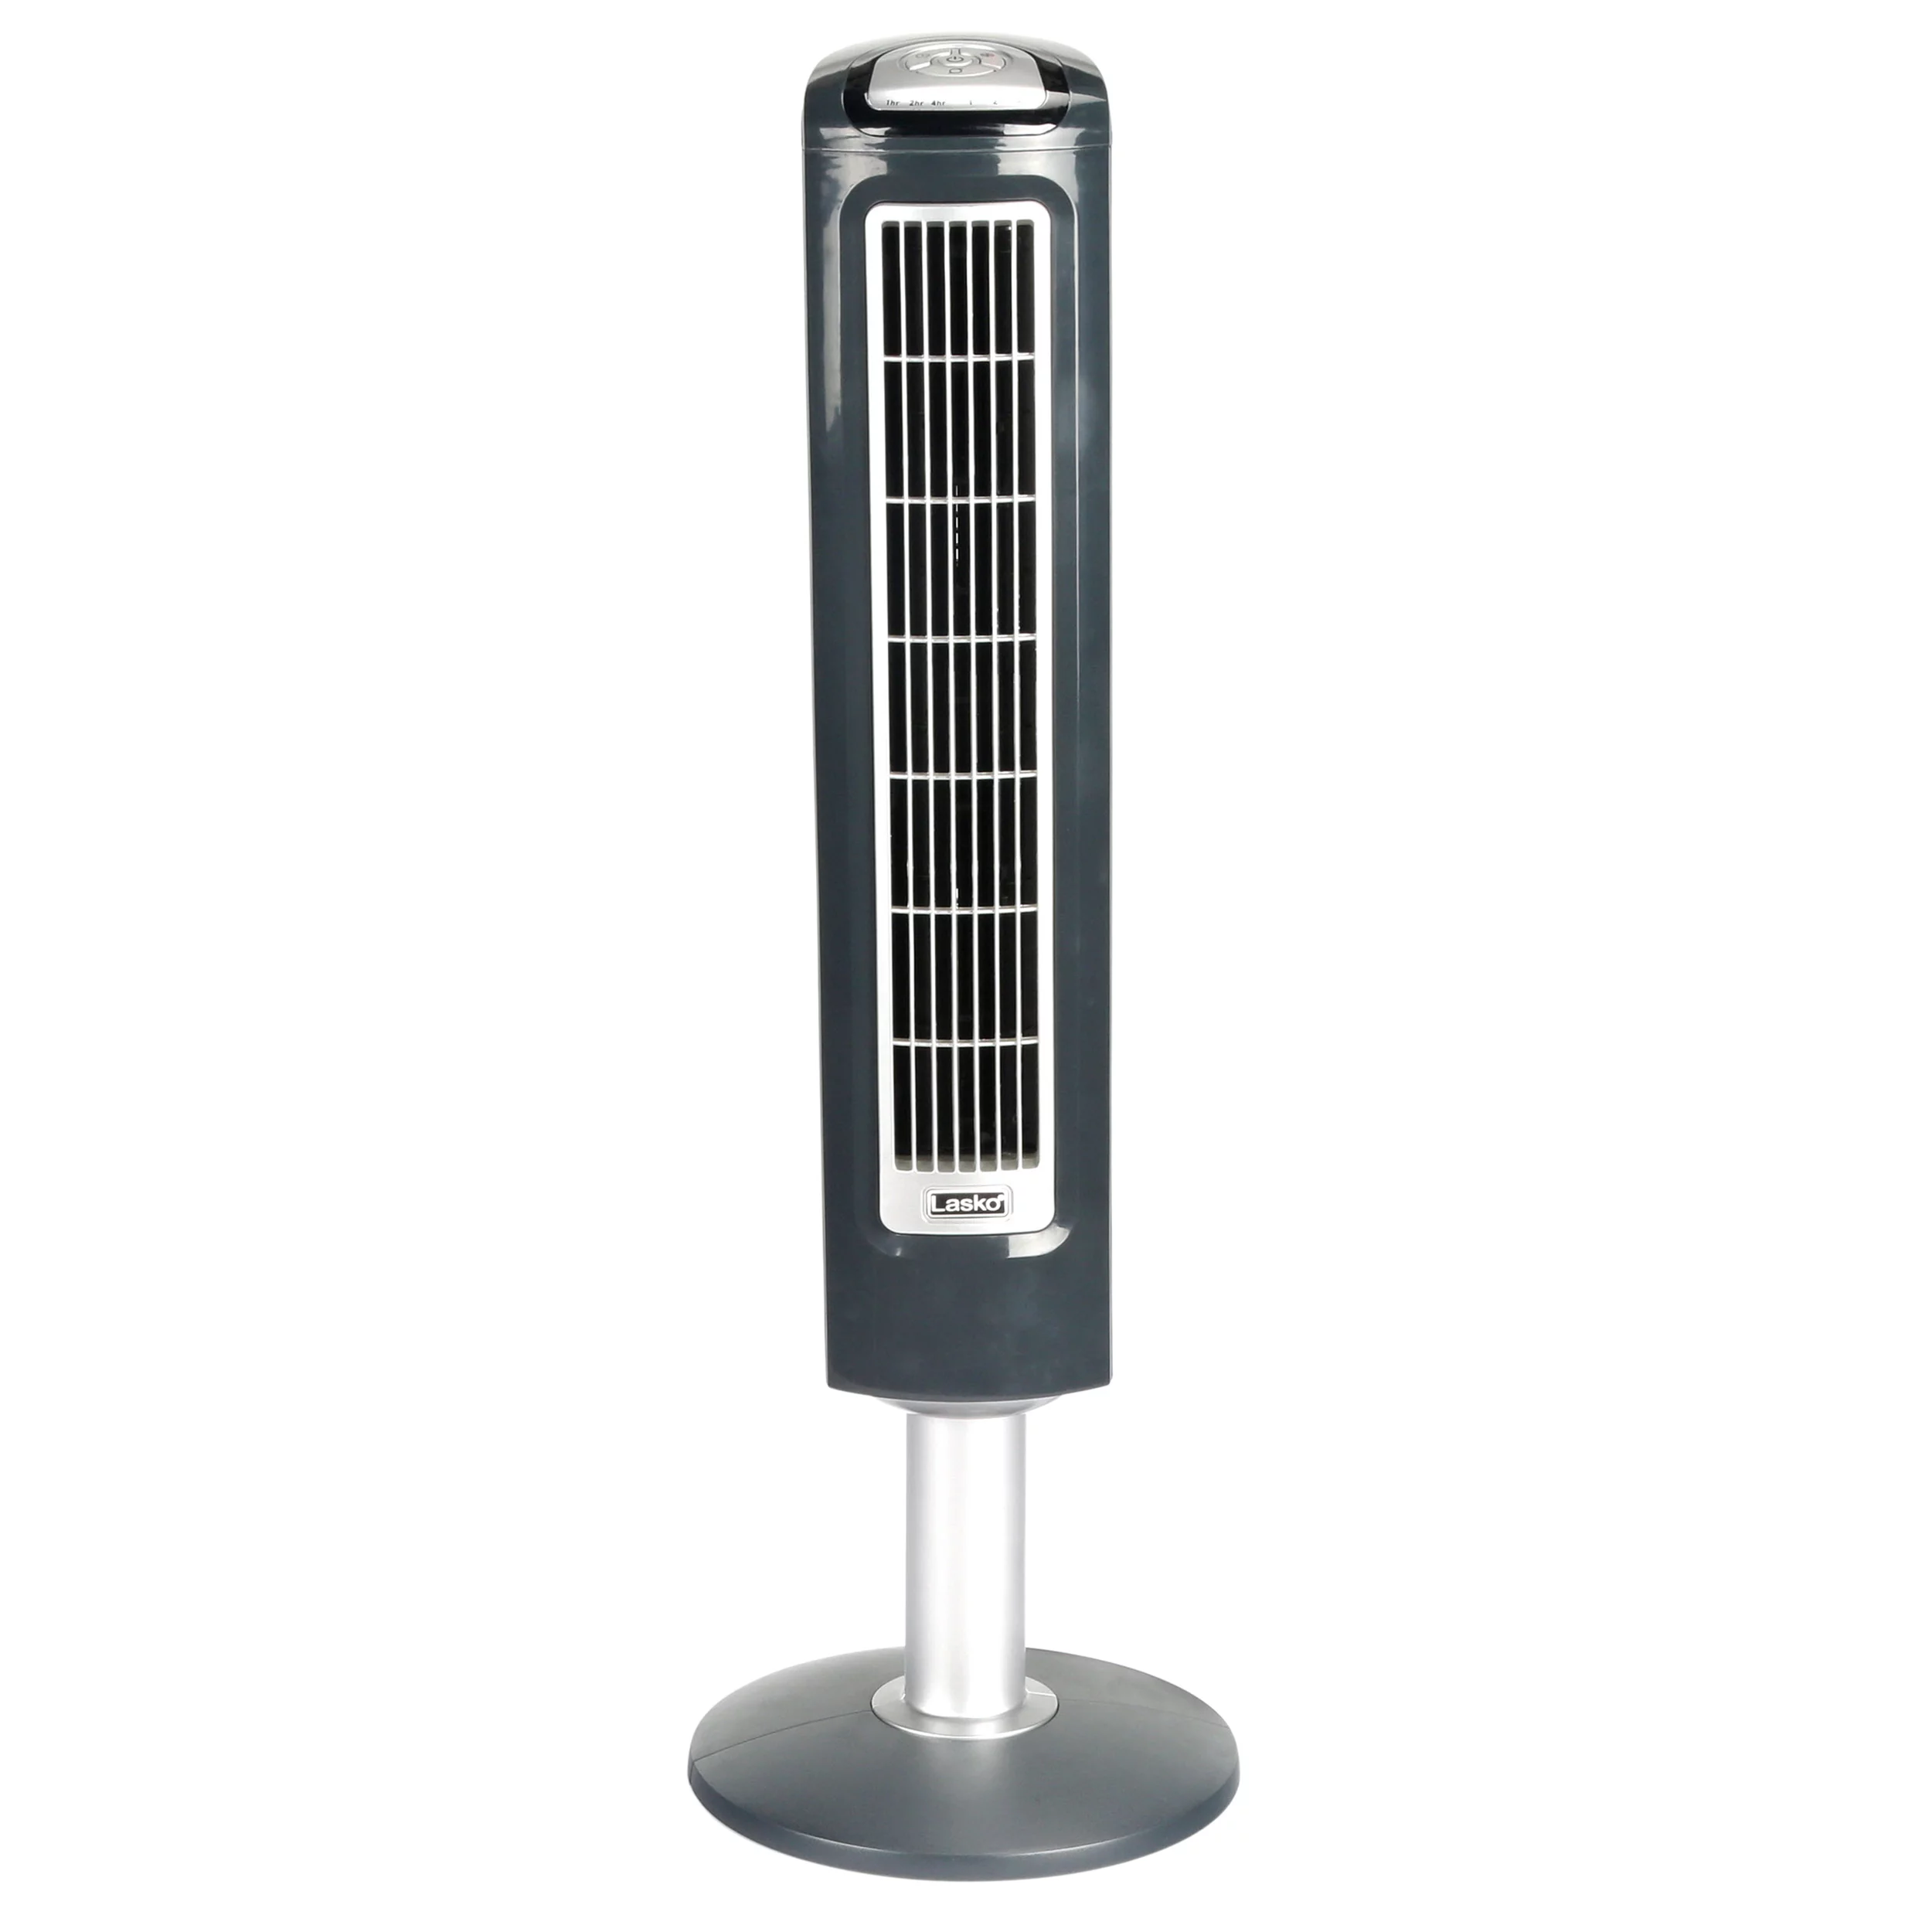 Lasko 38" Wind Tower 3-Speed Oscillating Tower Fan with Remote Control and Timer, Model 2519, Gray